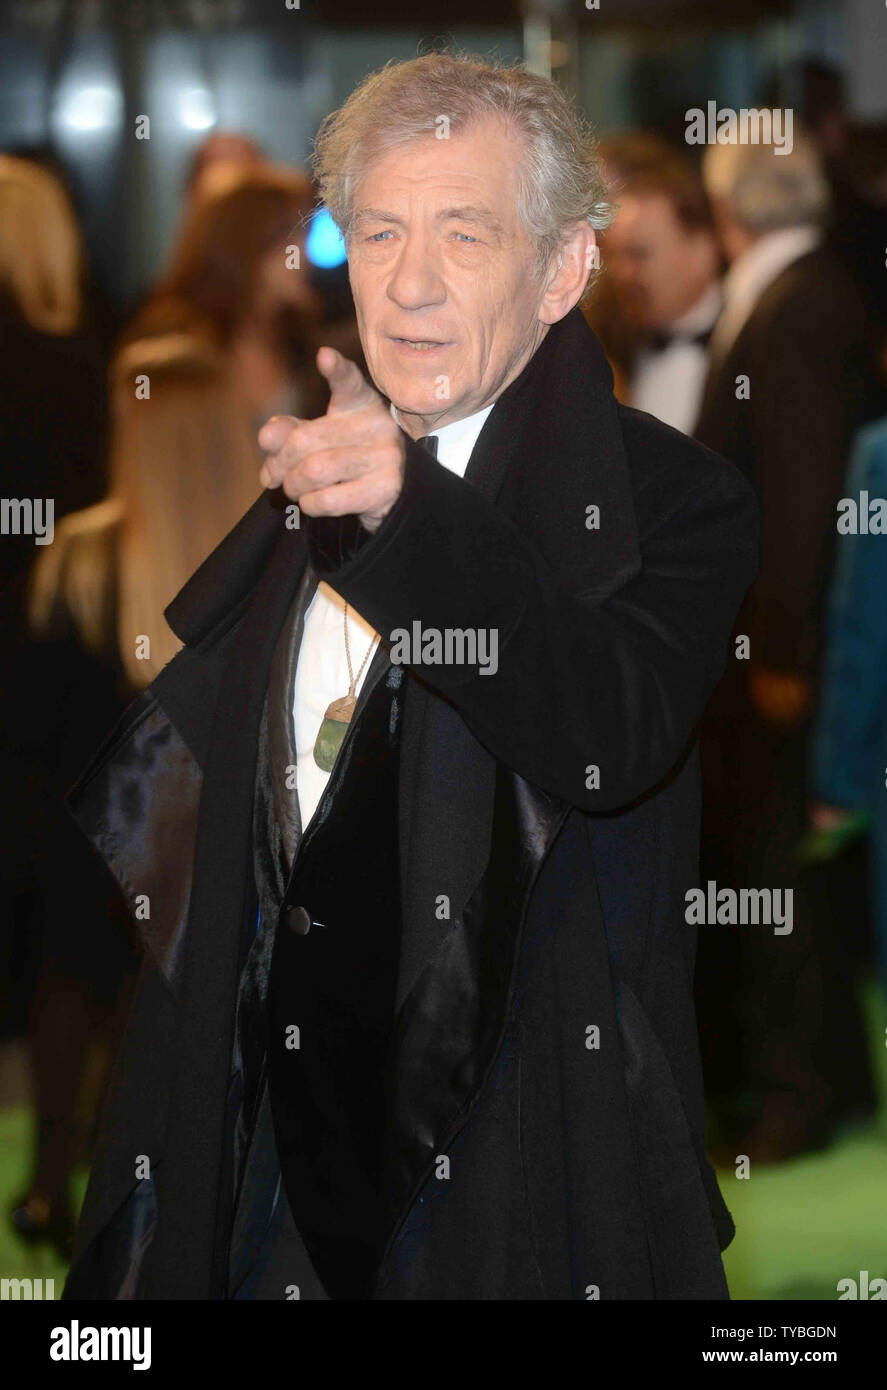 English actor Sir Ian McKellen attends The UK premiere of 'The Hobbit: An Unexpected Journey' at The Odeon Leicester Square and Empire Leicester Square, in London on December 12, 2012.     UPI/Paul Treadway Stock Photo